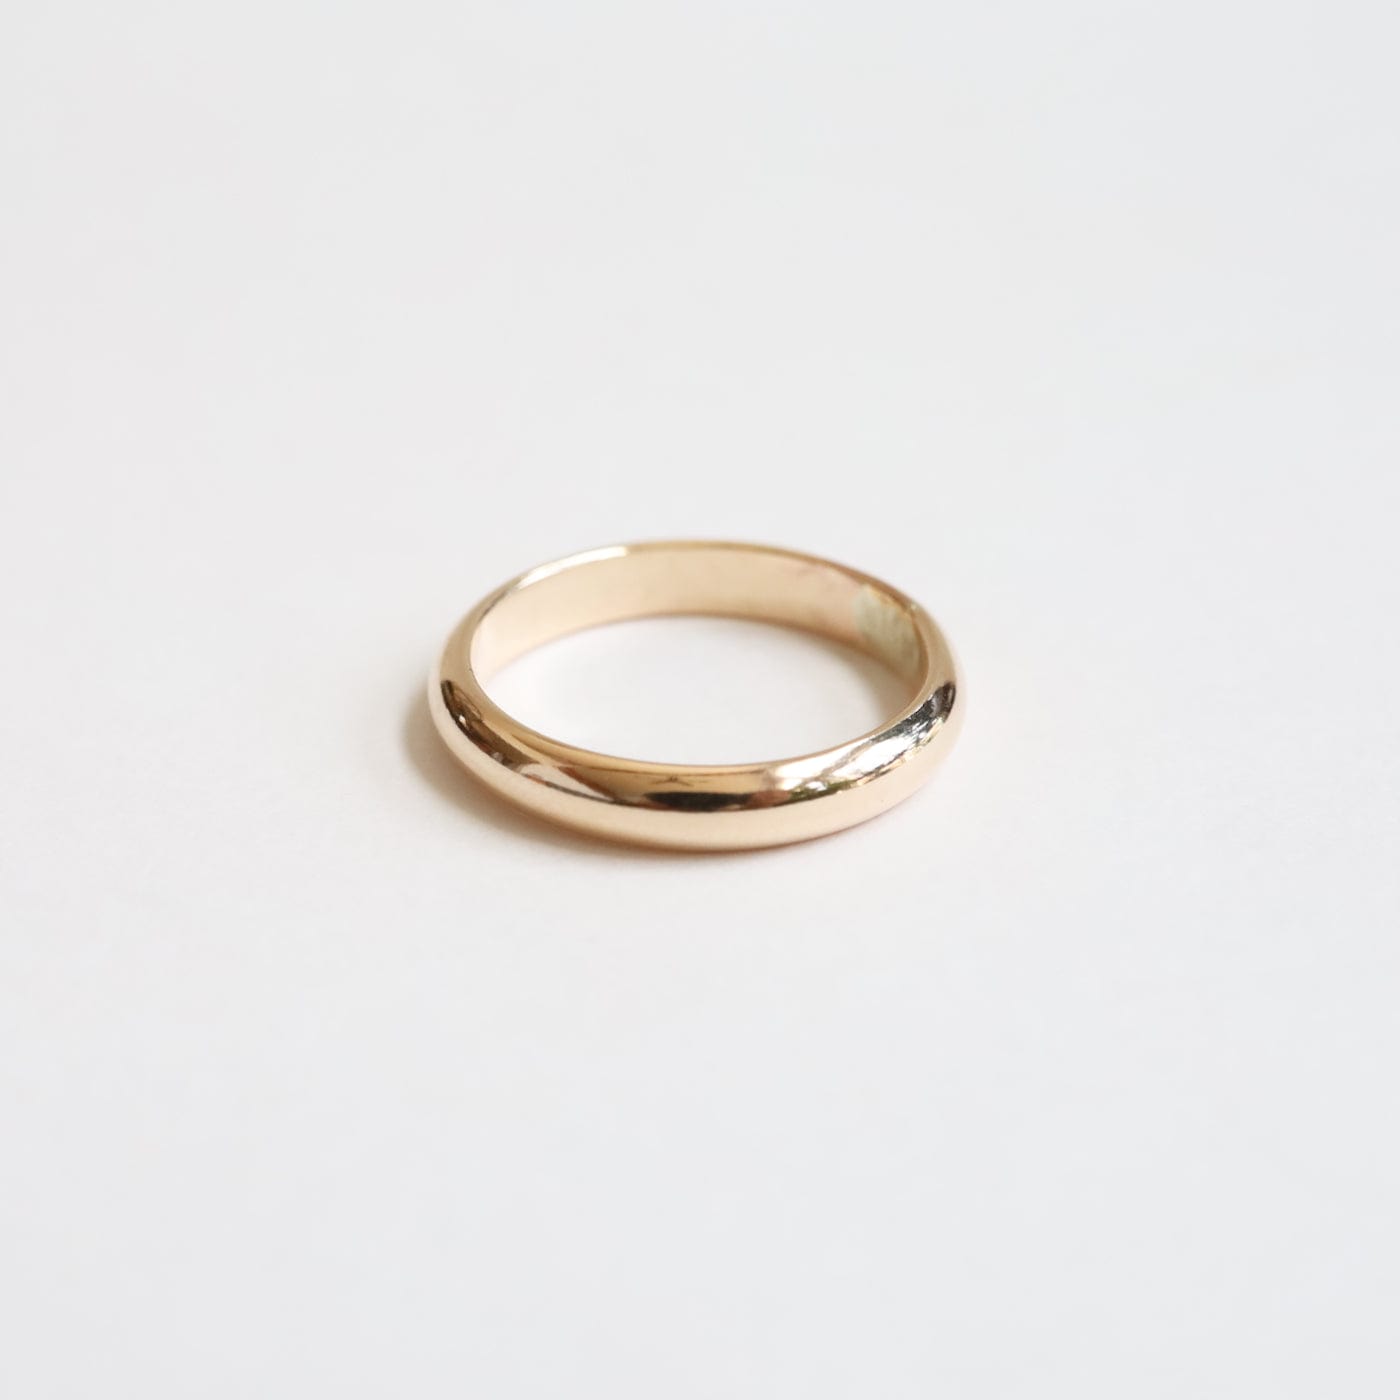 RNG-GF Simple 3mm Half Round Band - Gold Filled